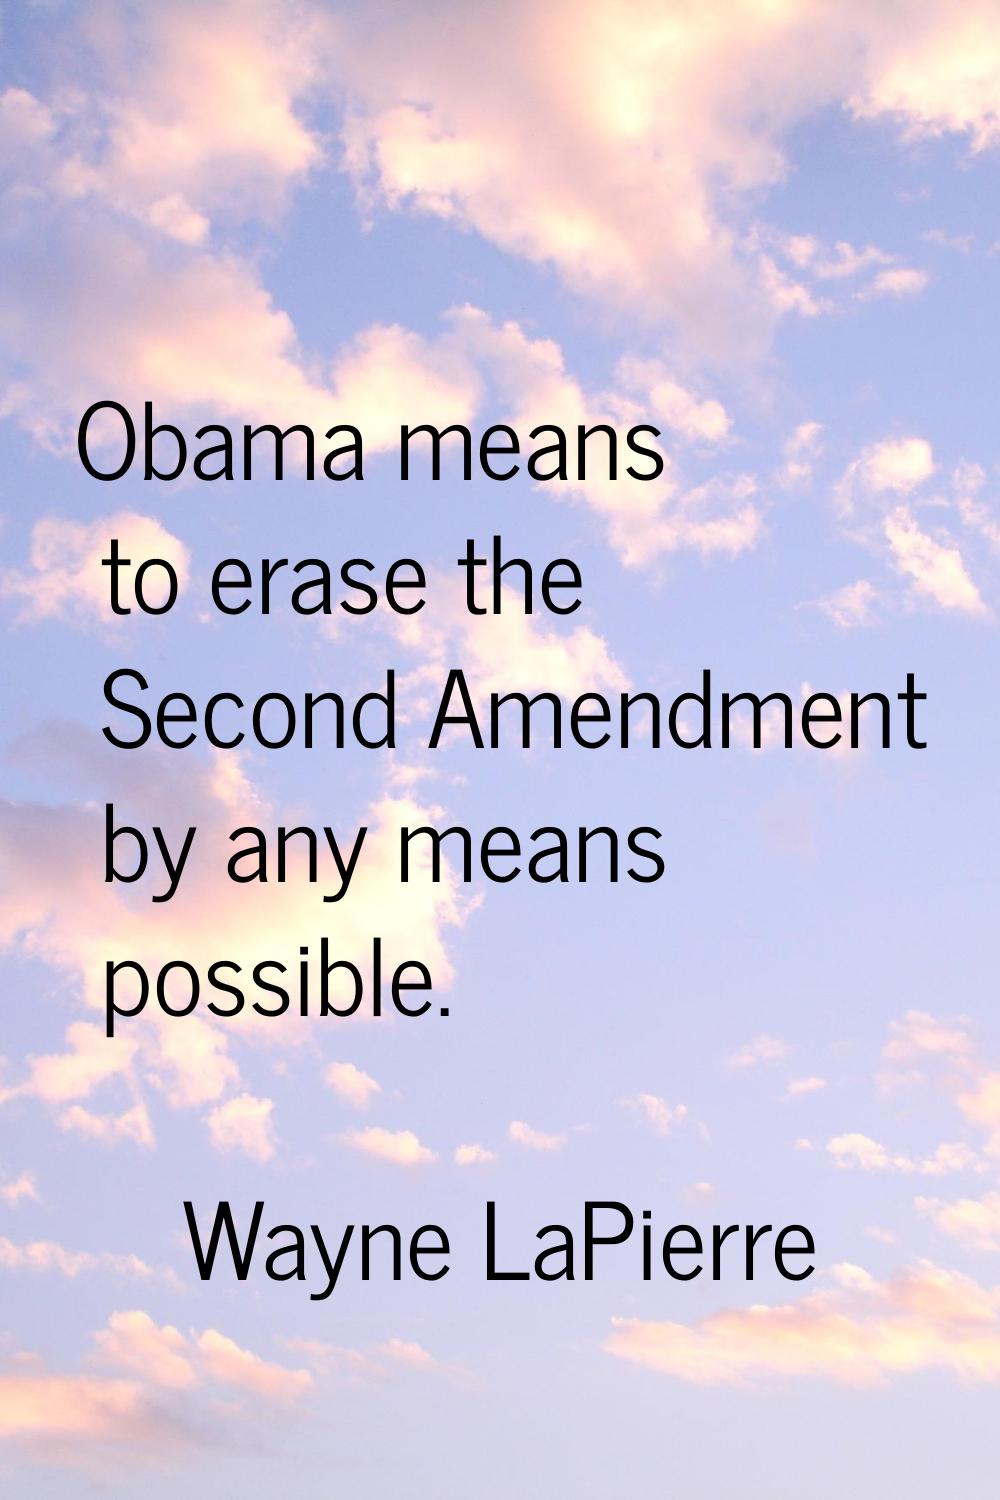 Obama means to erase the Second Amendment by any means possible.